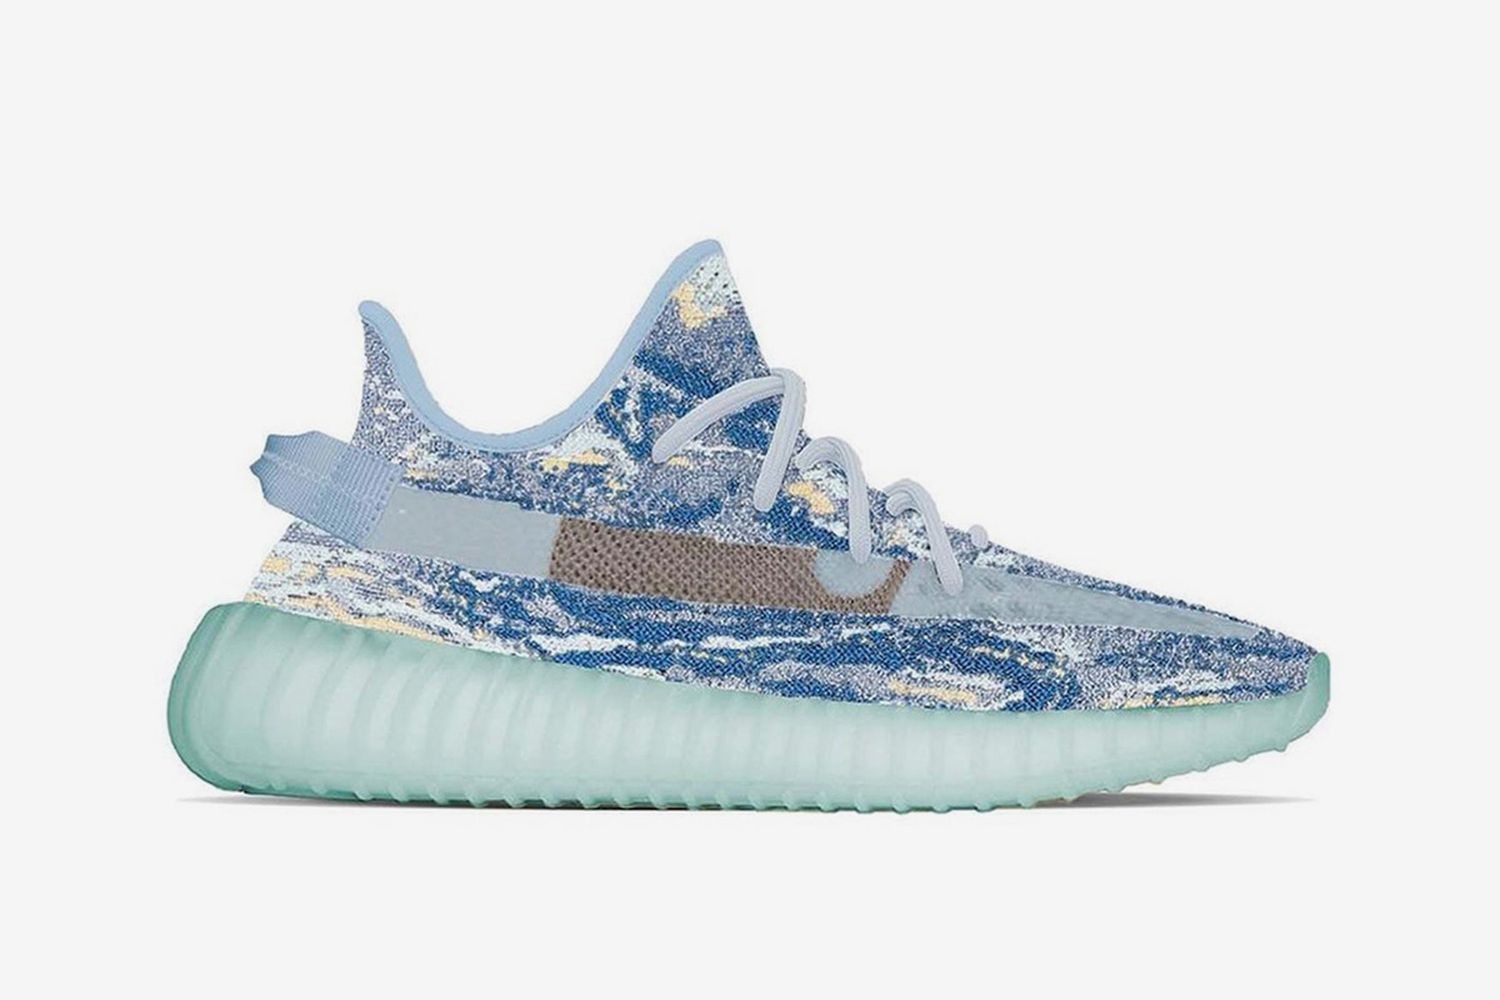 Shaded Grasp Bake adidas YEEZY Boost 350 V2 MX Frost Blue: Where to Buy & Price